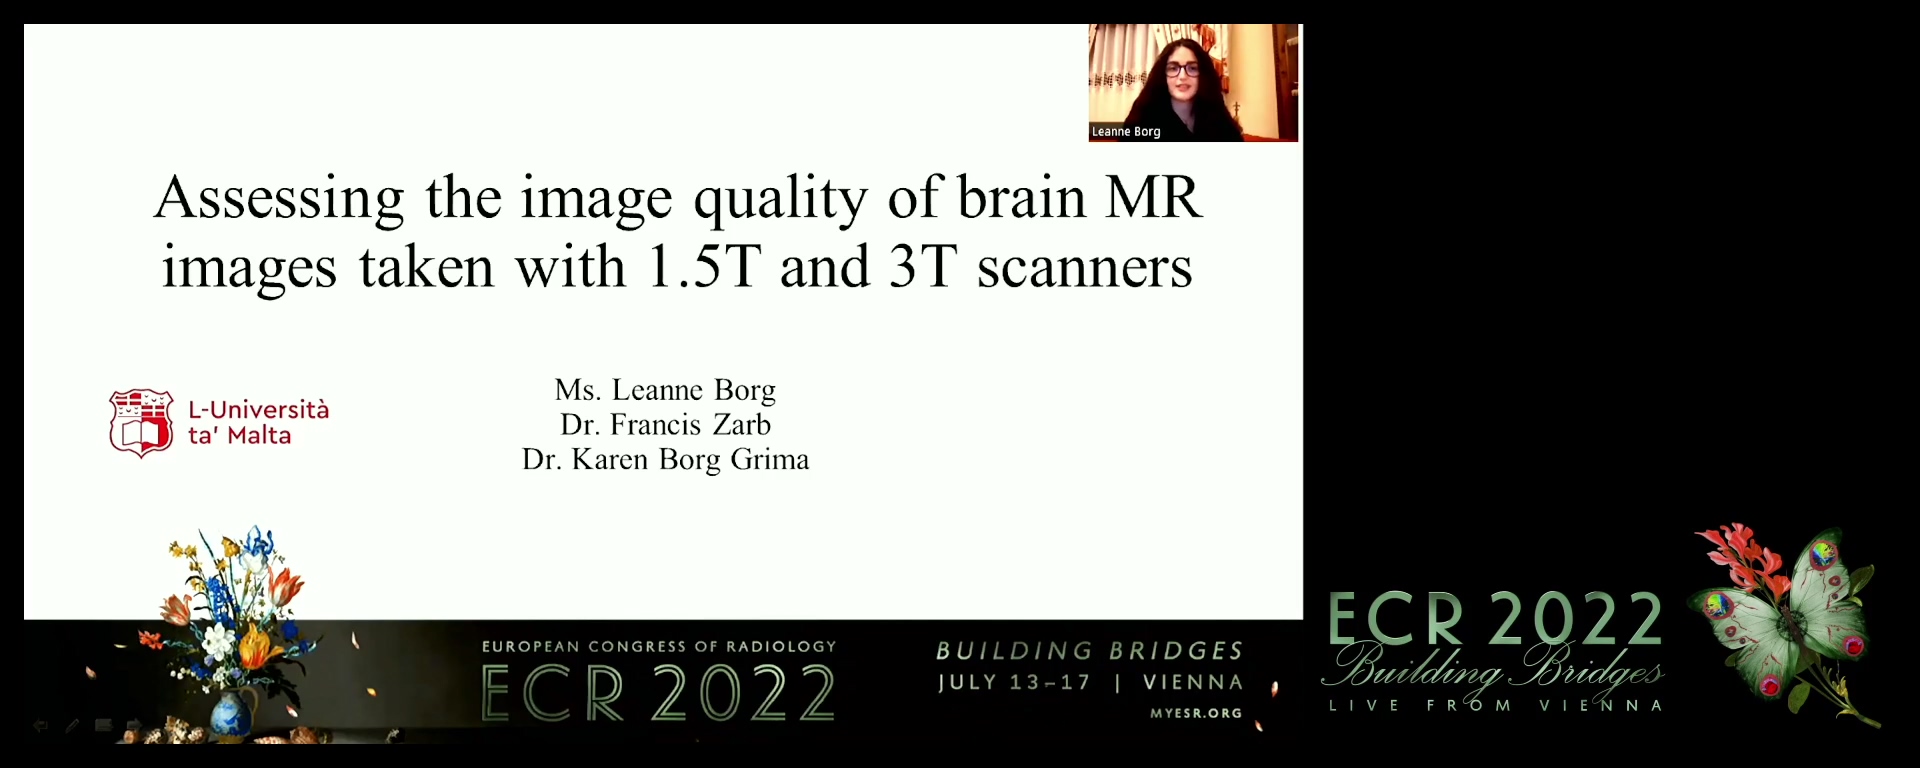 Assessing the image quality of brain MR images taken with 1.5T and 3T scanners - Leanne Borg, Mtarfa / MT